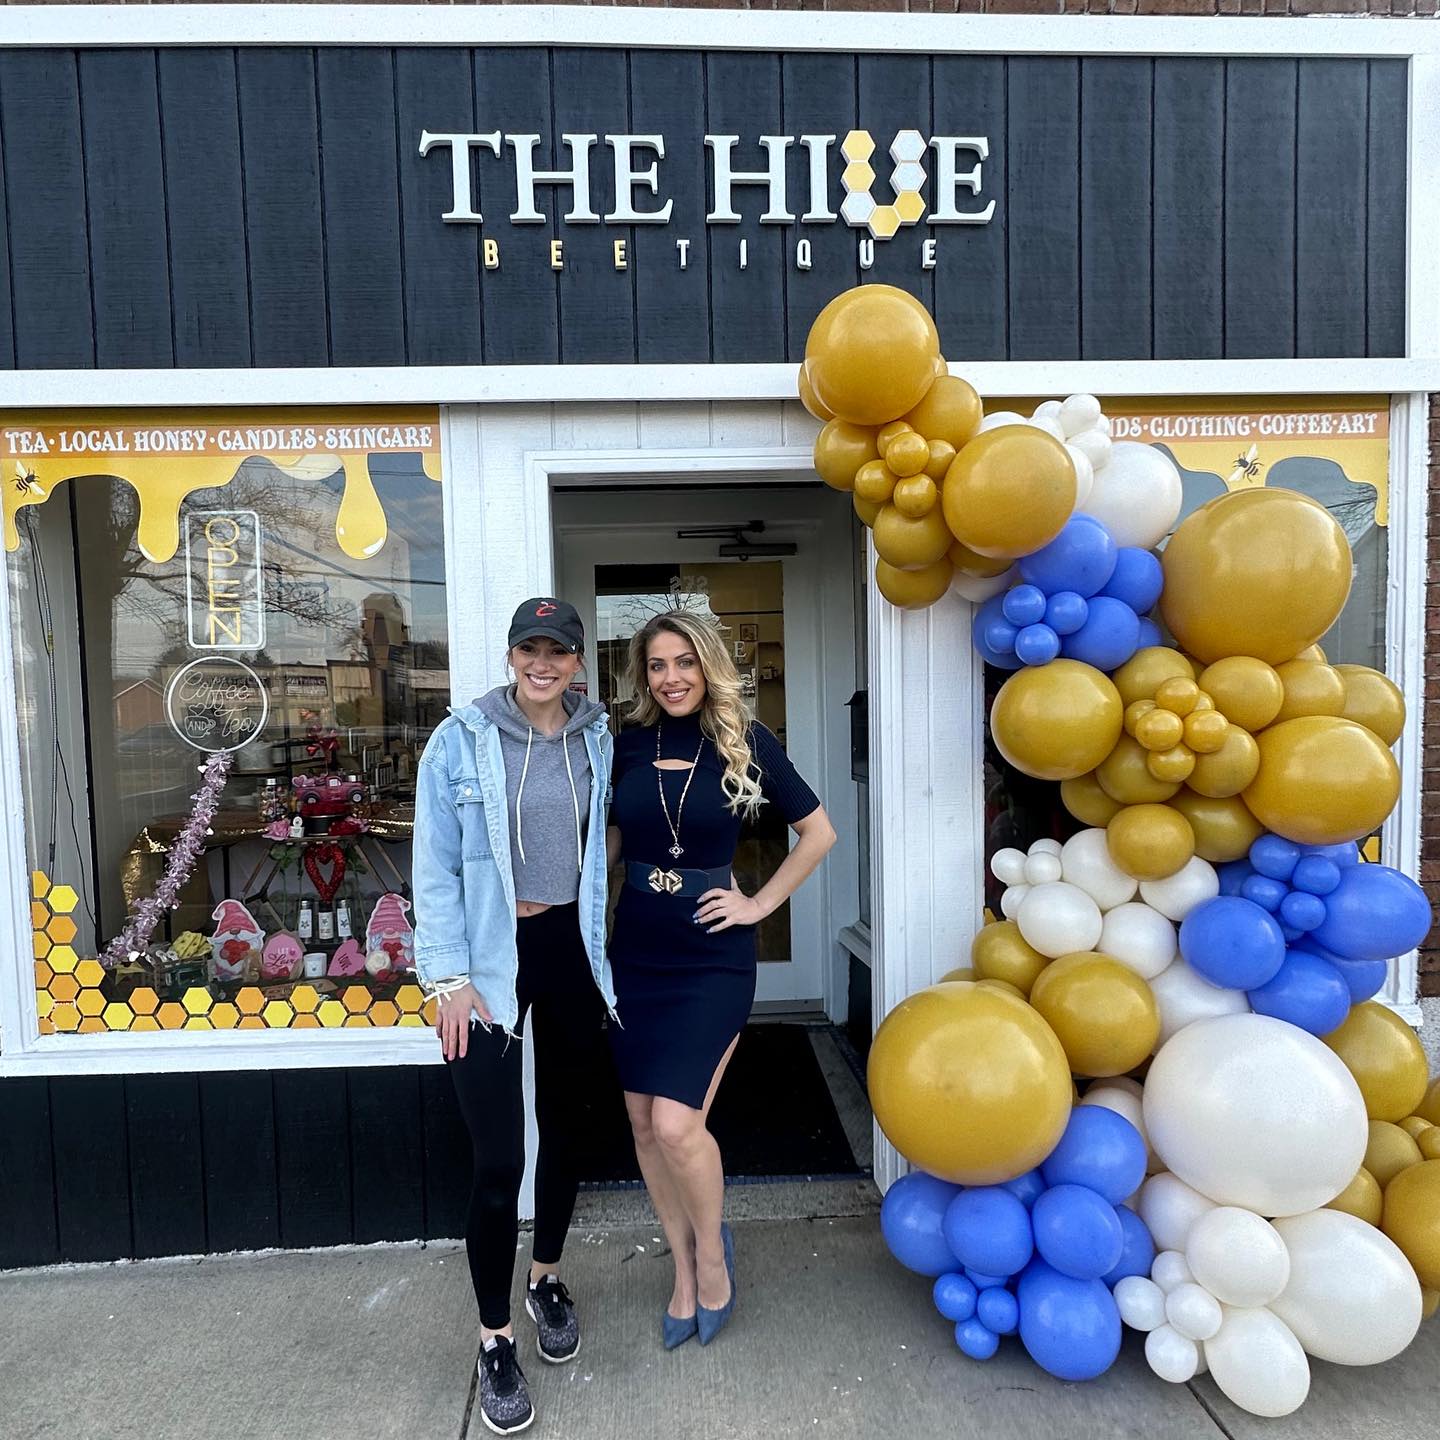 Wishing I could put @roccityballoons back up 🍯🐝💙😍 
@thehive585 is open today till 4pm 🤗 

Thank you so much again to @nikilaird for being such an amazing artist to work with and supporting @thehive585 grand opening so beautifully with your balloon arrangement ❤️‍🔥 
Looking forward to working with you again ❗️

If you’re in the Rochester NY area book @roccityballoons for your special occasions.🥰🙏🏼

#thehive585 #hintofher #roccityballoons #rochesterny #585 #shoplocal #supportsmallbusiness #localhoney #localbrand